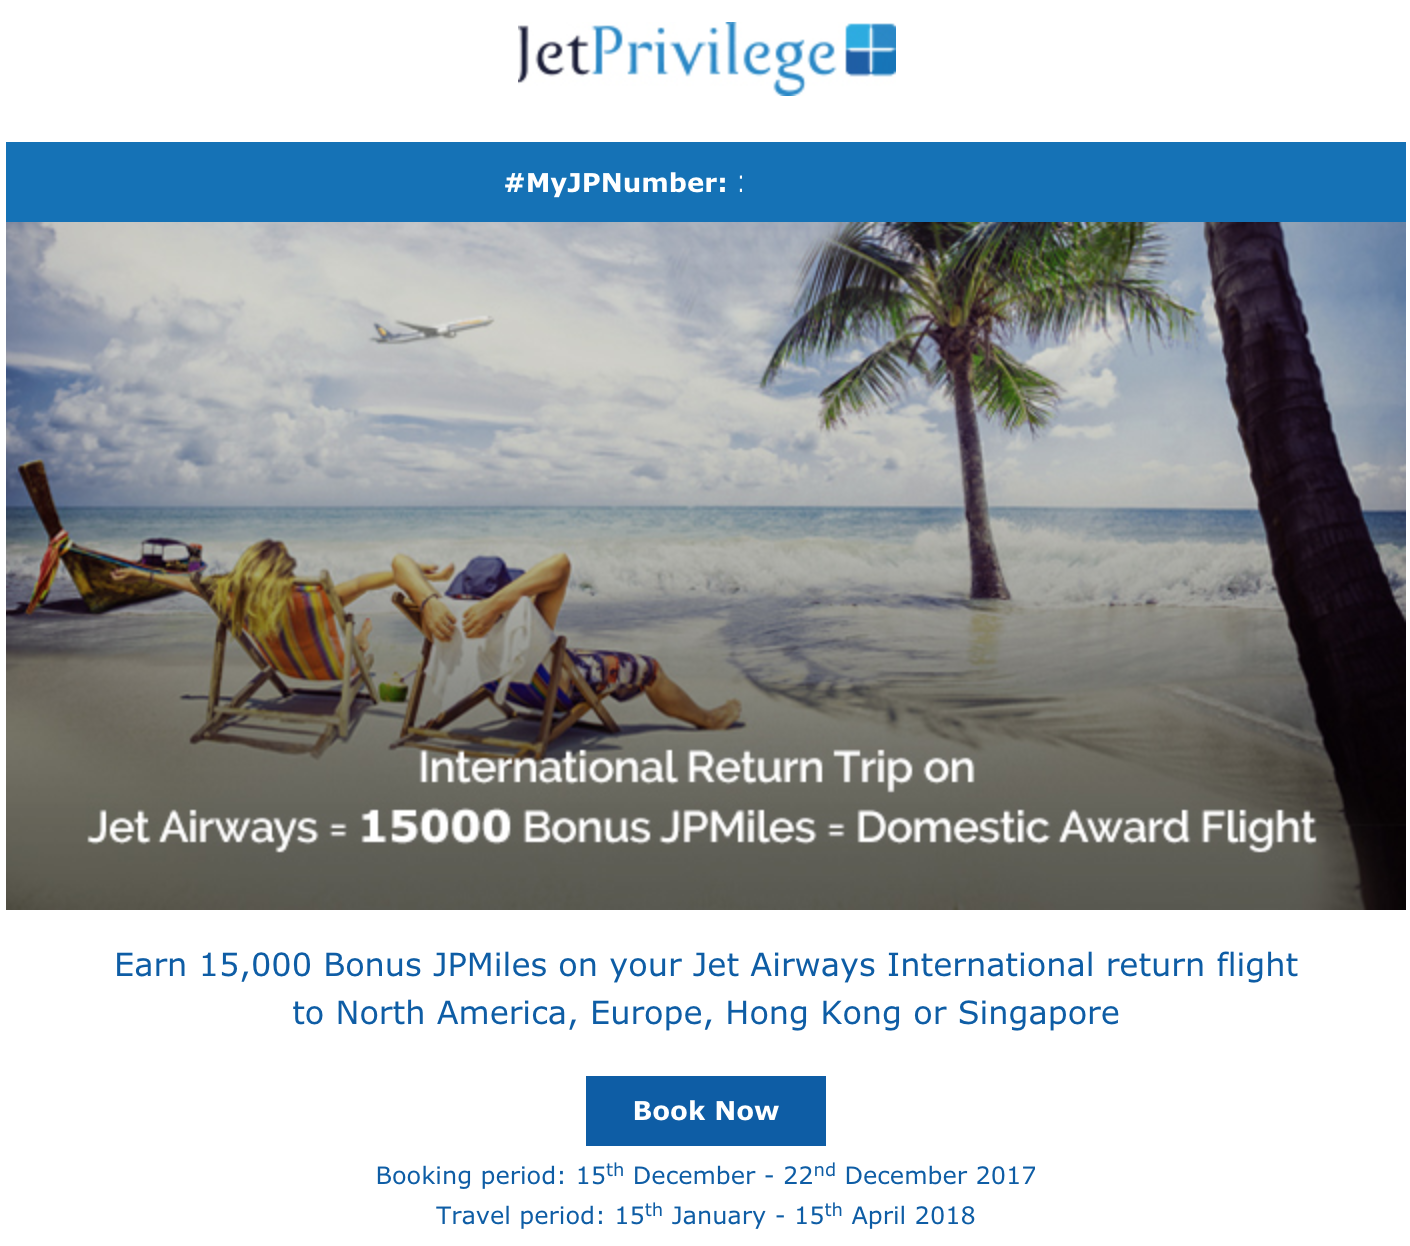 JetPrivilege Bonus Miles will earn you a free business class ticket